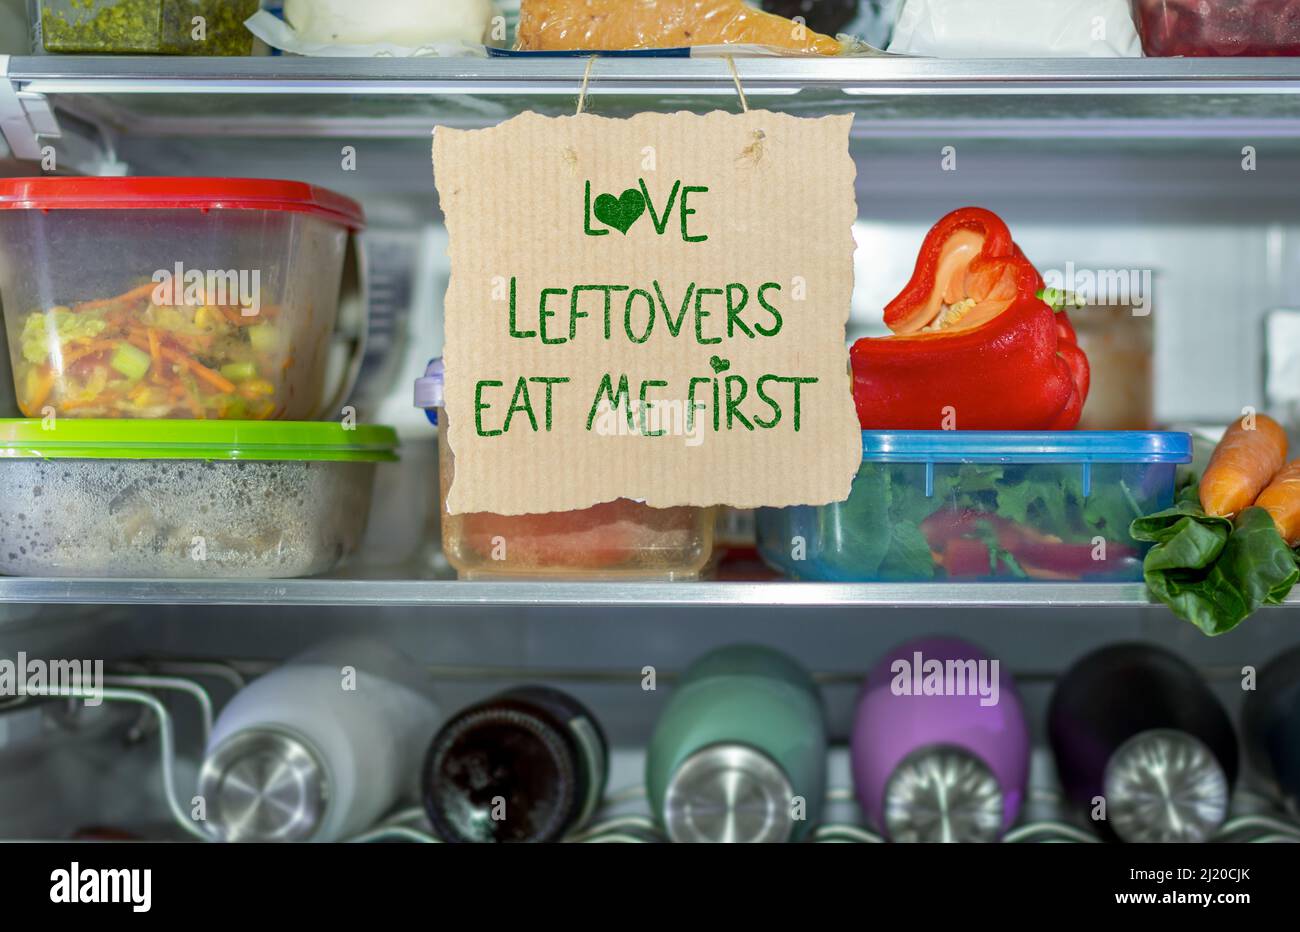 Love Leftovers Eat Me First handmade sign in fridge,  help reduce food waste, know where to look first, simple reduce food waste concept. Stock Photo